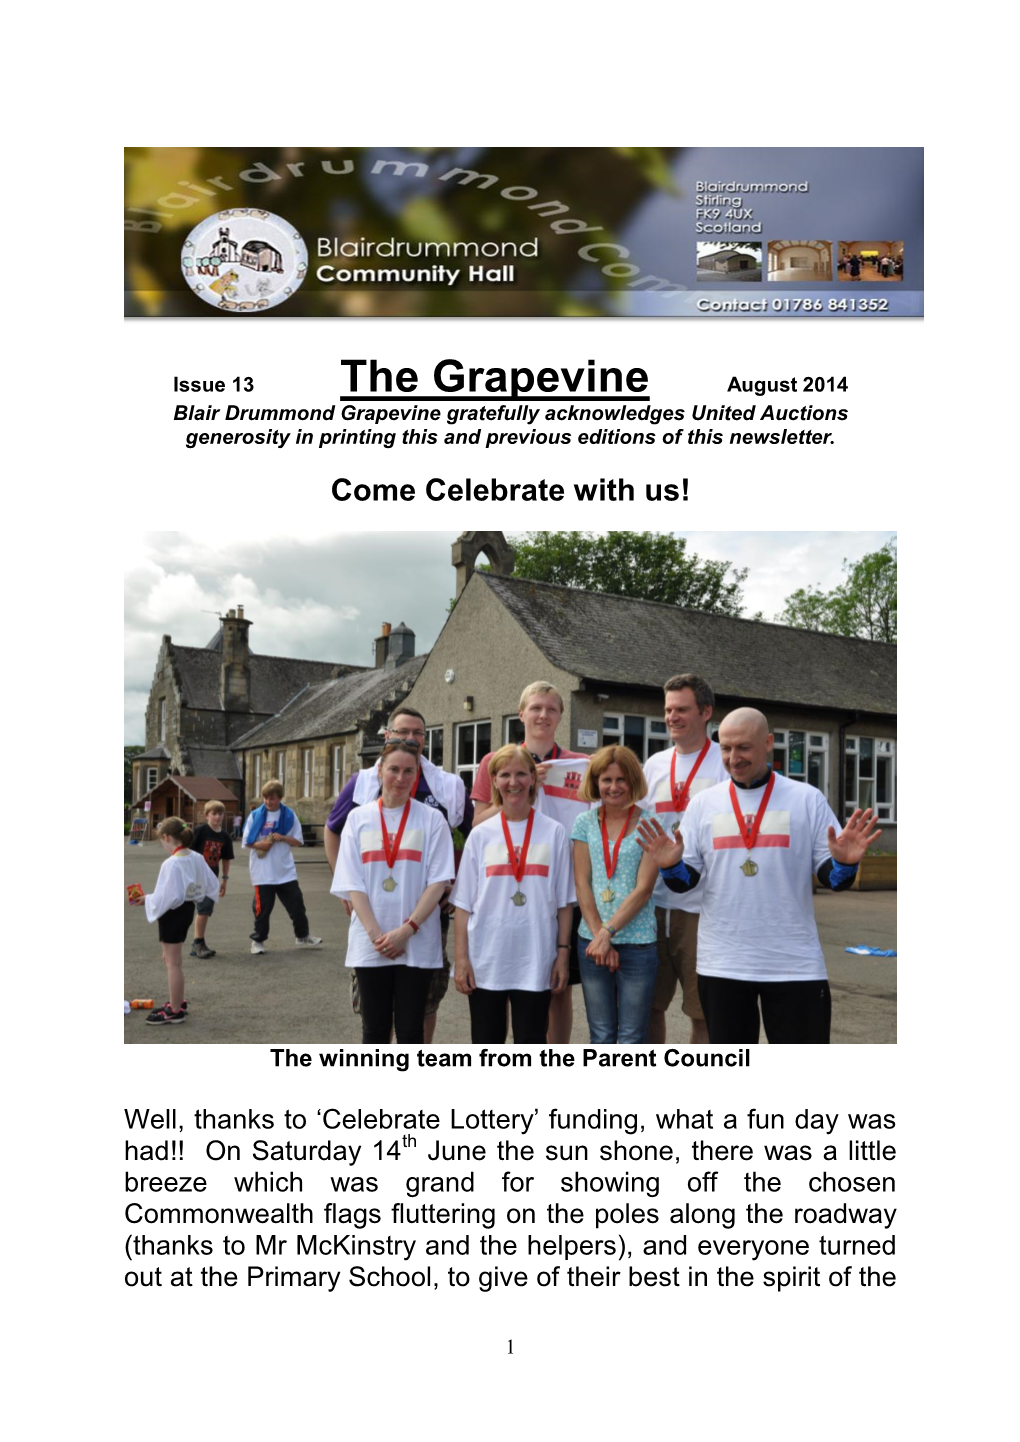 The Grapevine August 2014 Blair Drummond Grapevine Gratefully Acknowledges United Auctions Generosity in Printing This and Previous Editions of This Newsletter